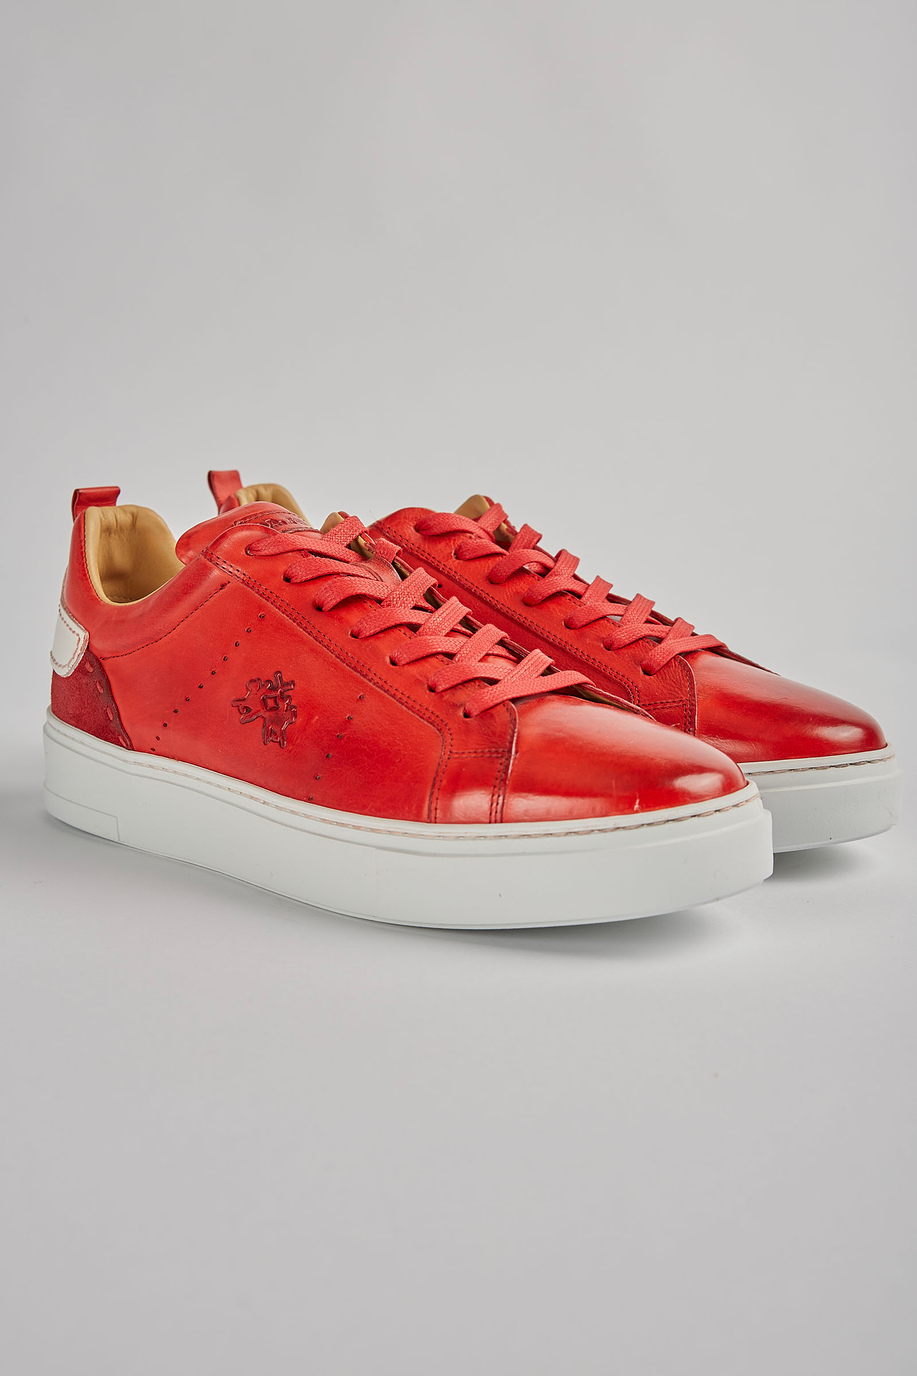 Vegetable eco-leather sneaker